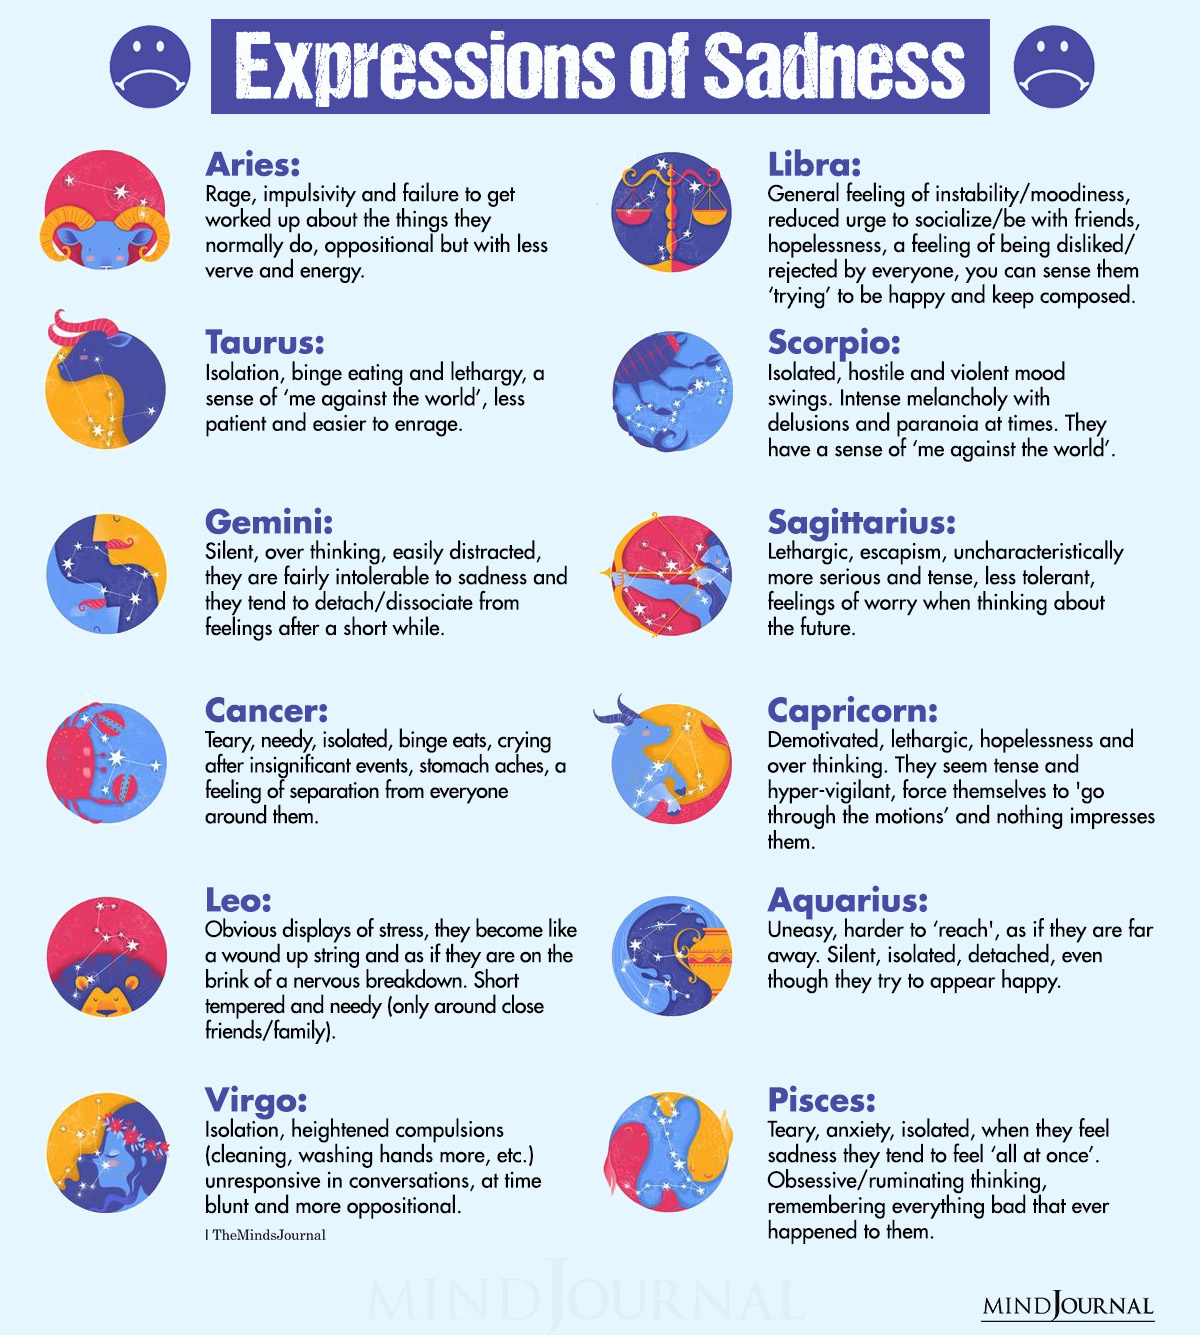 zodiac signs and their expressions to sadness feature